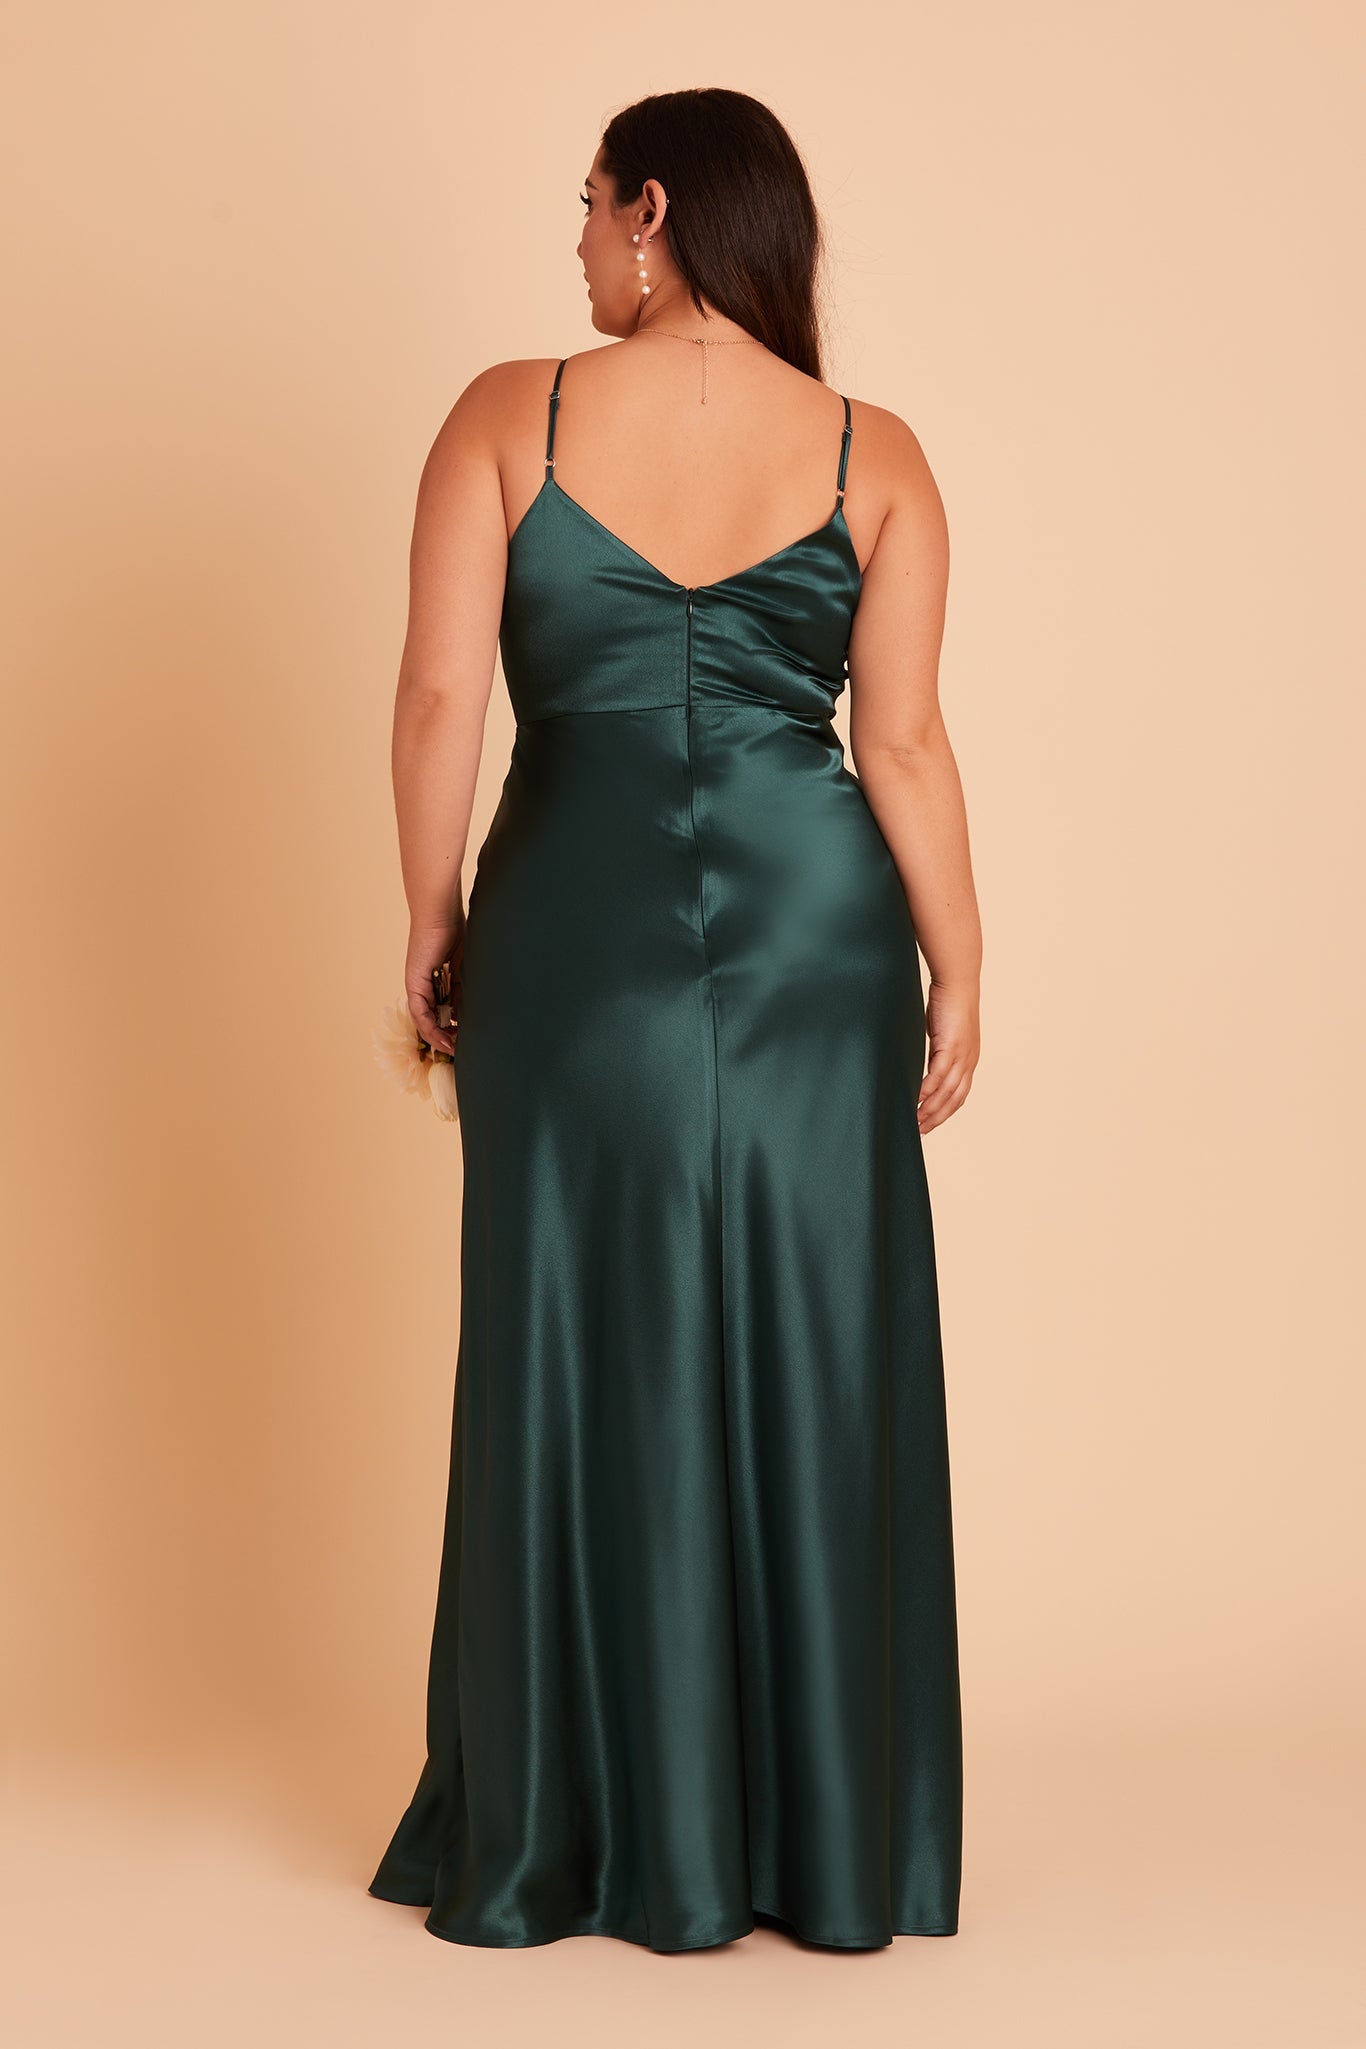 Jay plus size bridesmaid dress with slit in emerald satin by Birdy Grey, back view